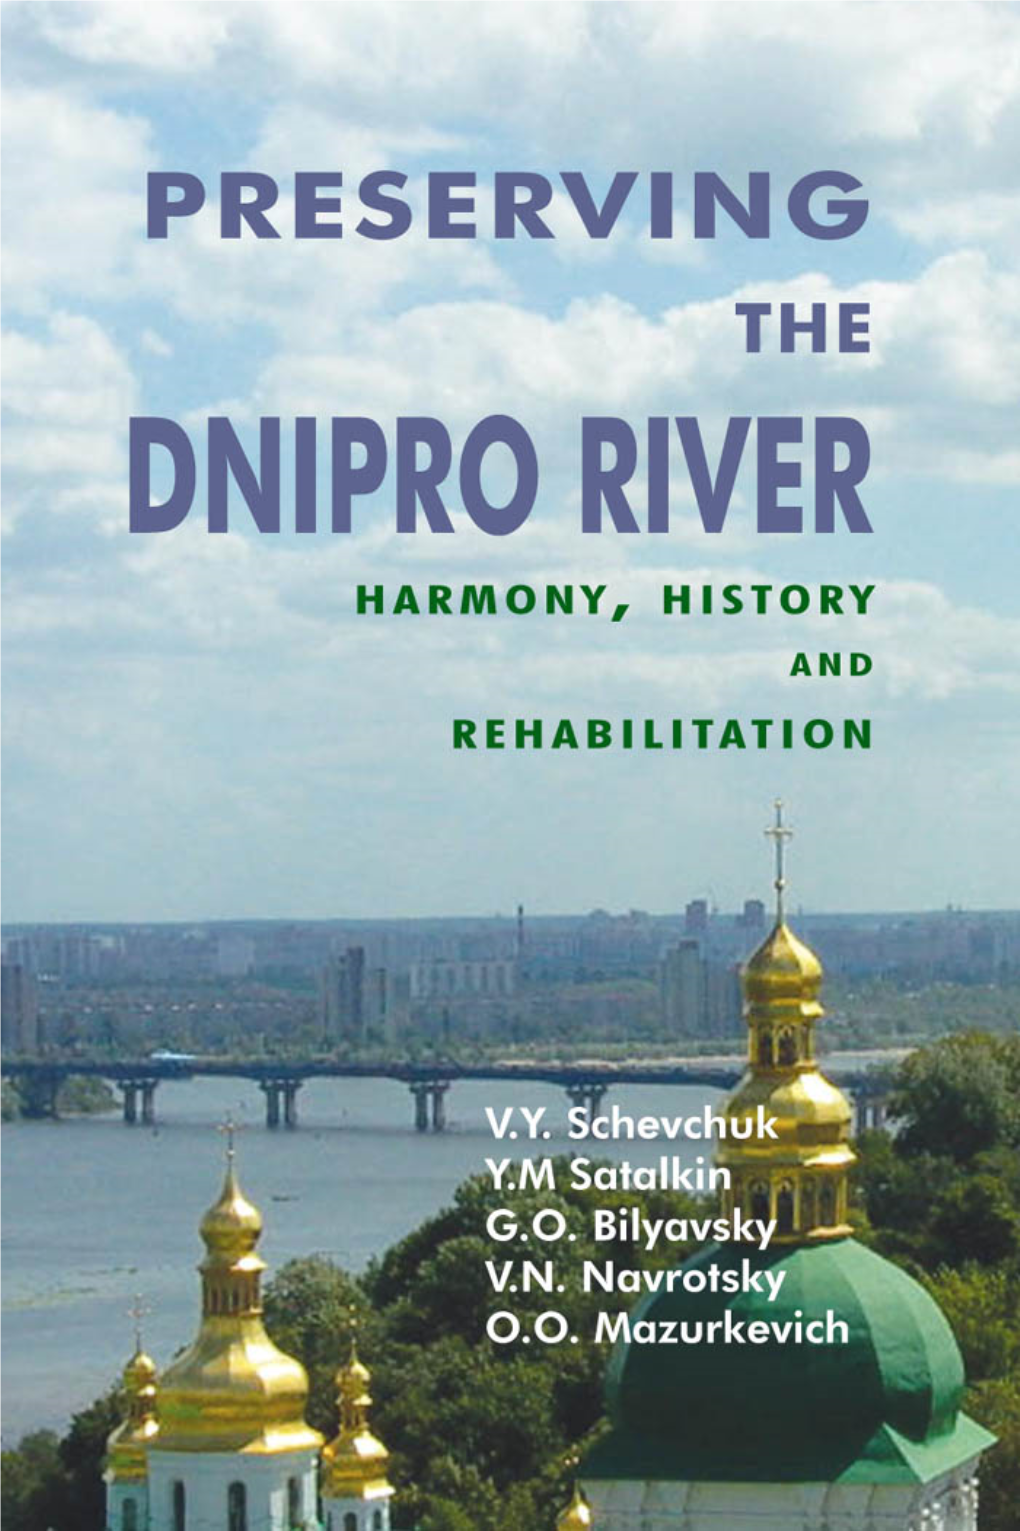 PRESERVING the DNIPRO RIVER Harmony, History and Rehabilitation PRESERVING the DNIPRO RIVER Harmony, History and Rehabilitation